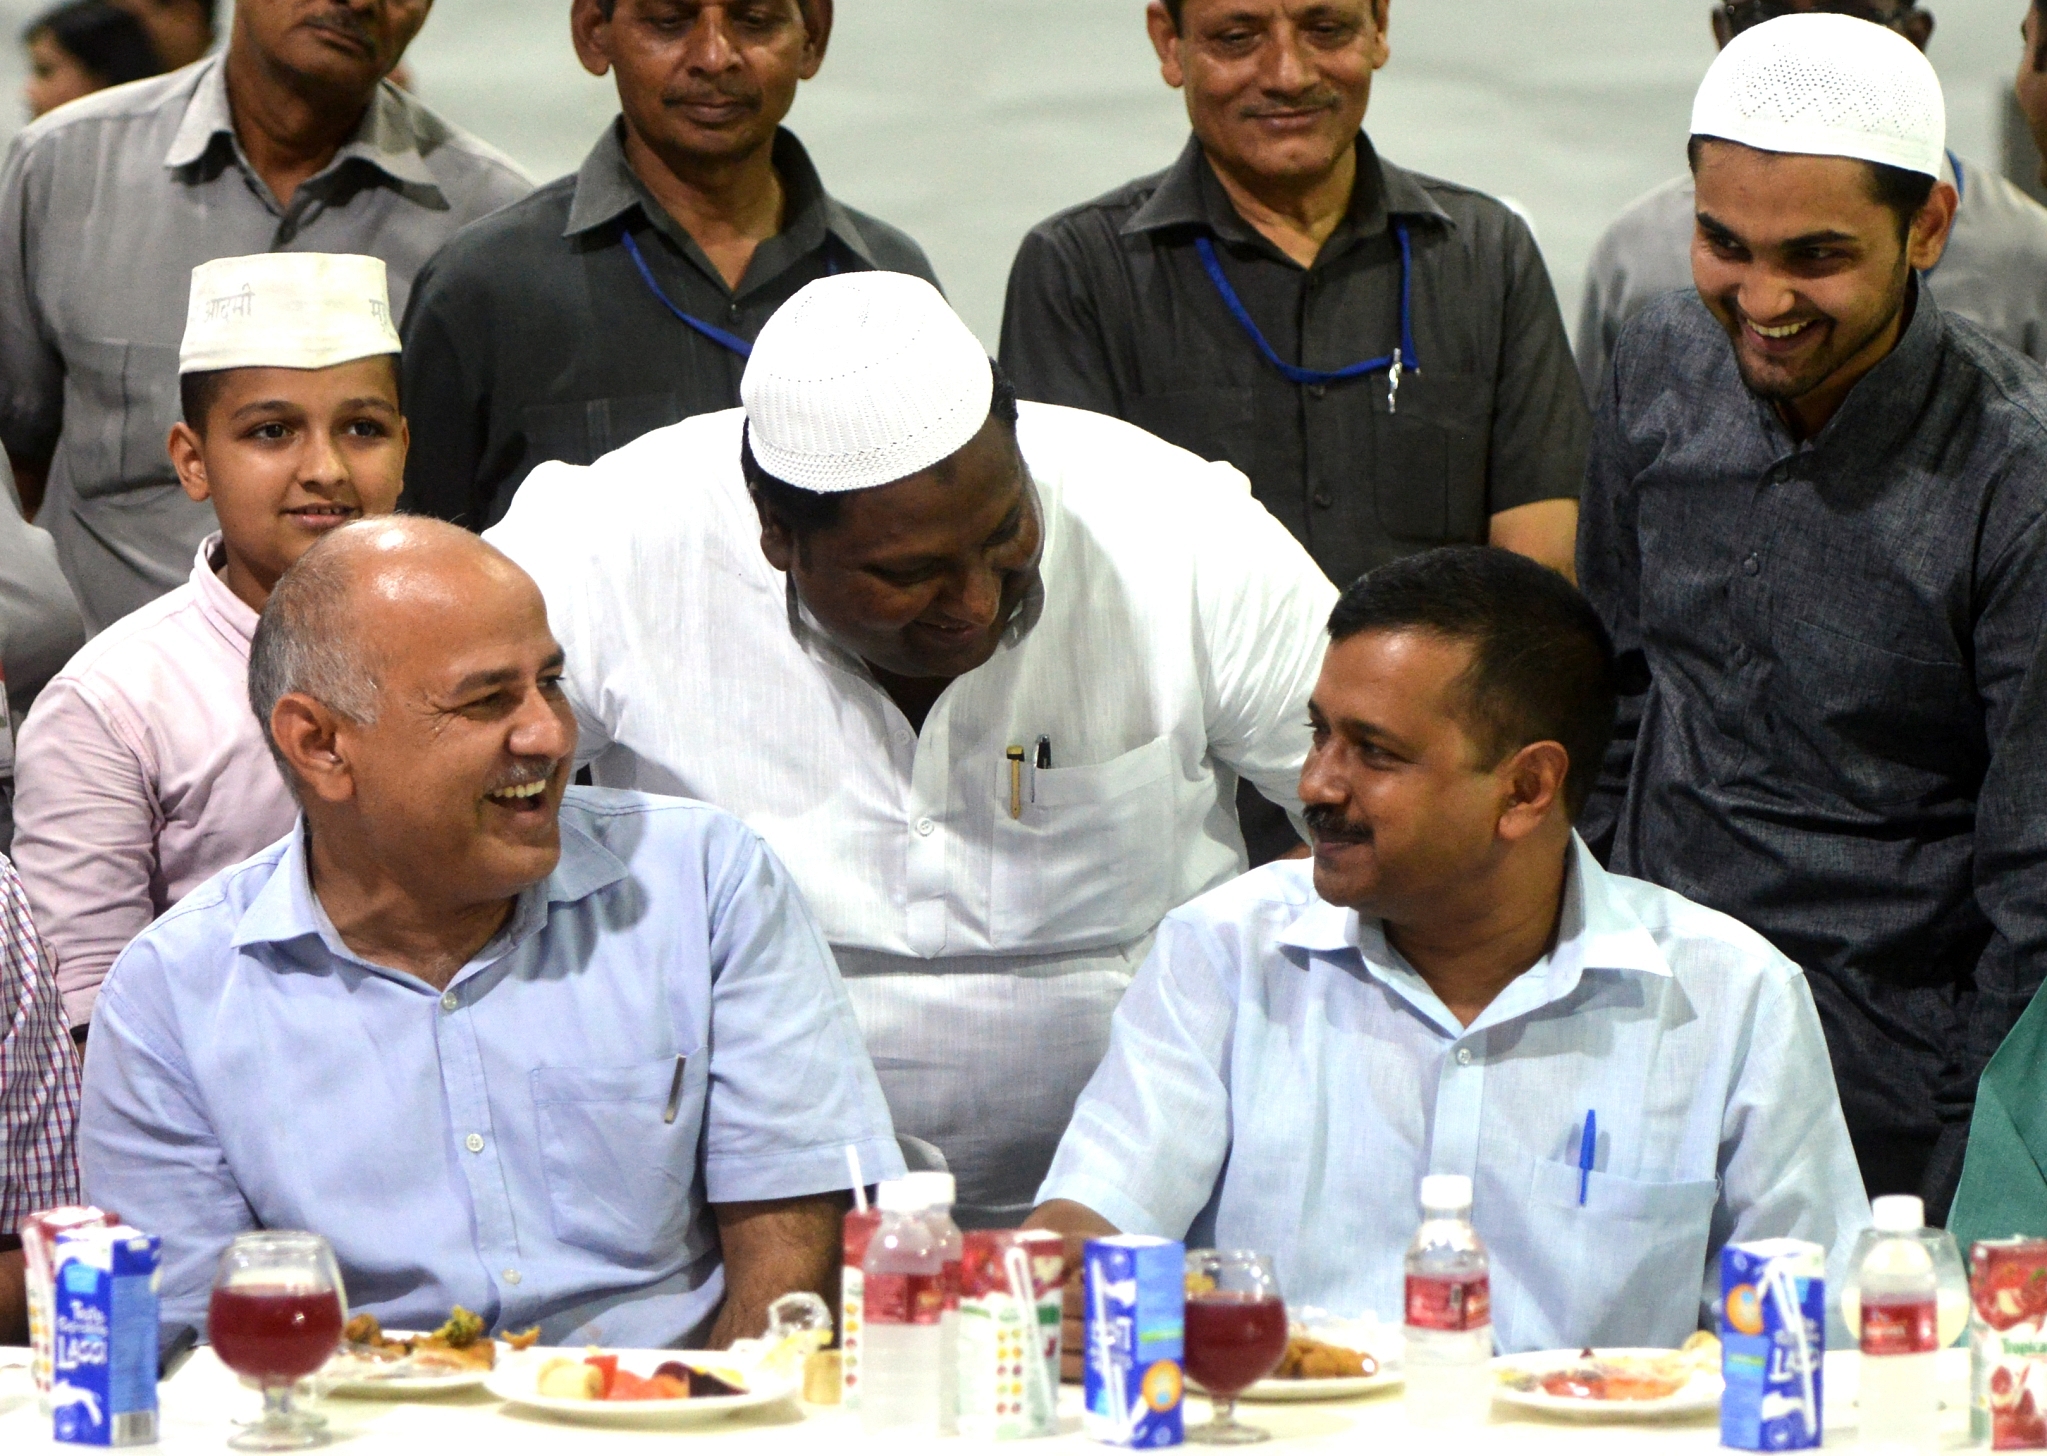 Arvind Kejriwal and Manish Sisodia at an Iftaar party (K Asif/India Today Group/Getty Images)